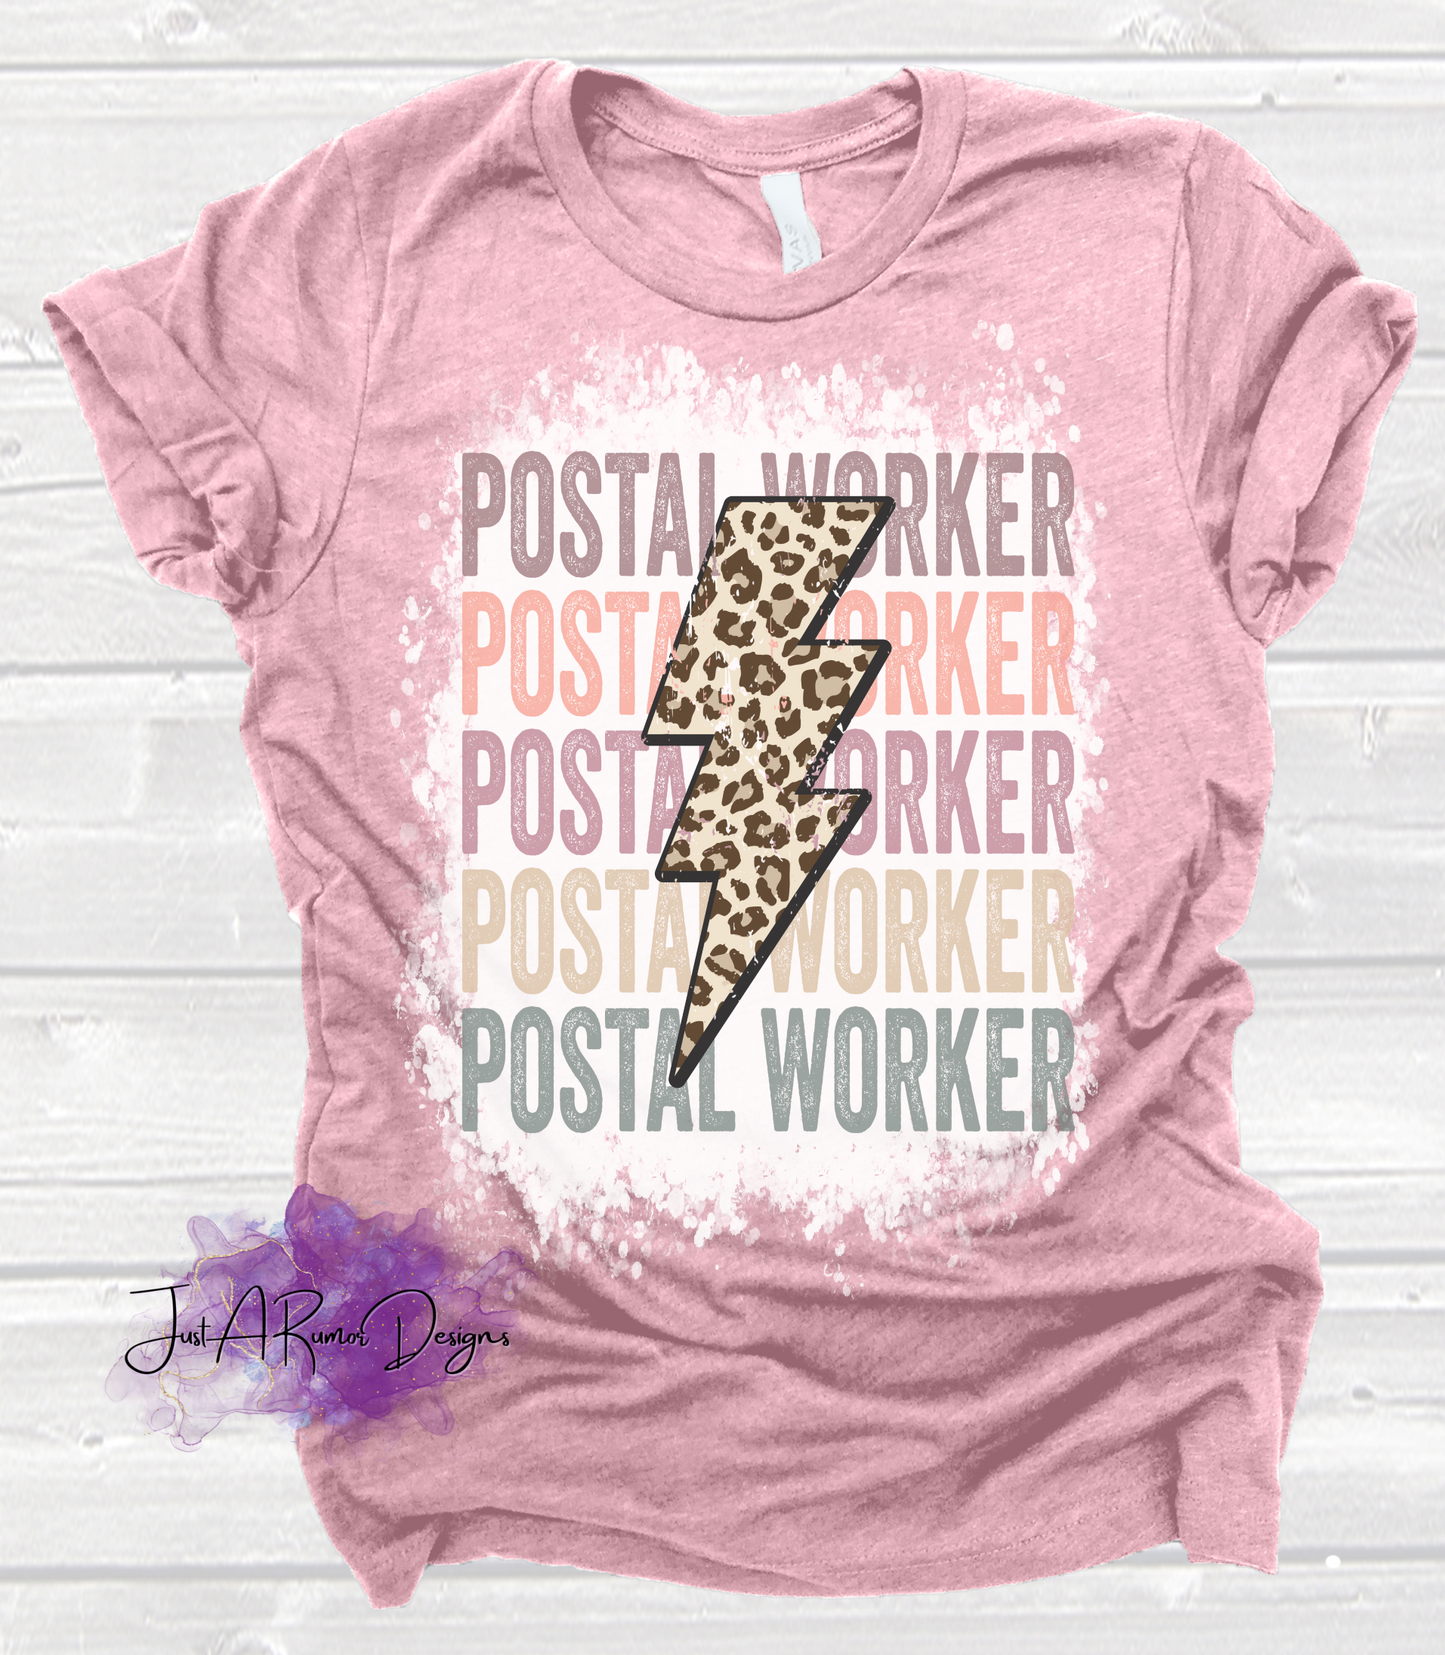 Stacked Postal Worker Shirt